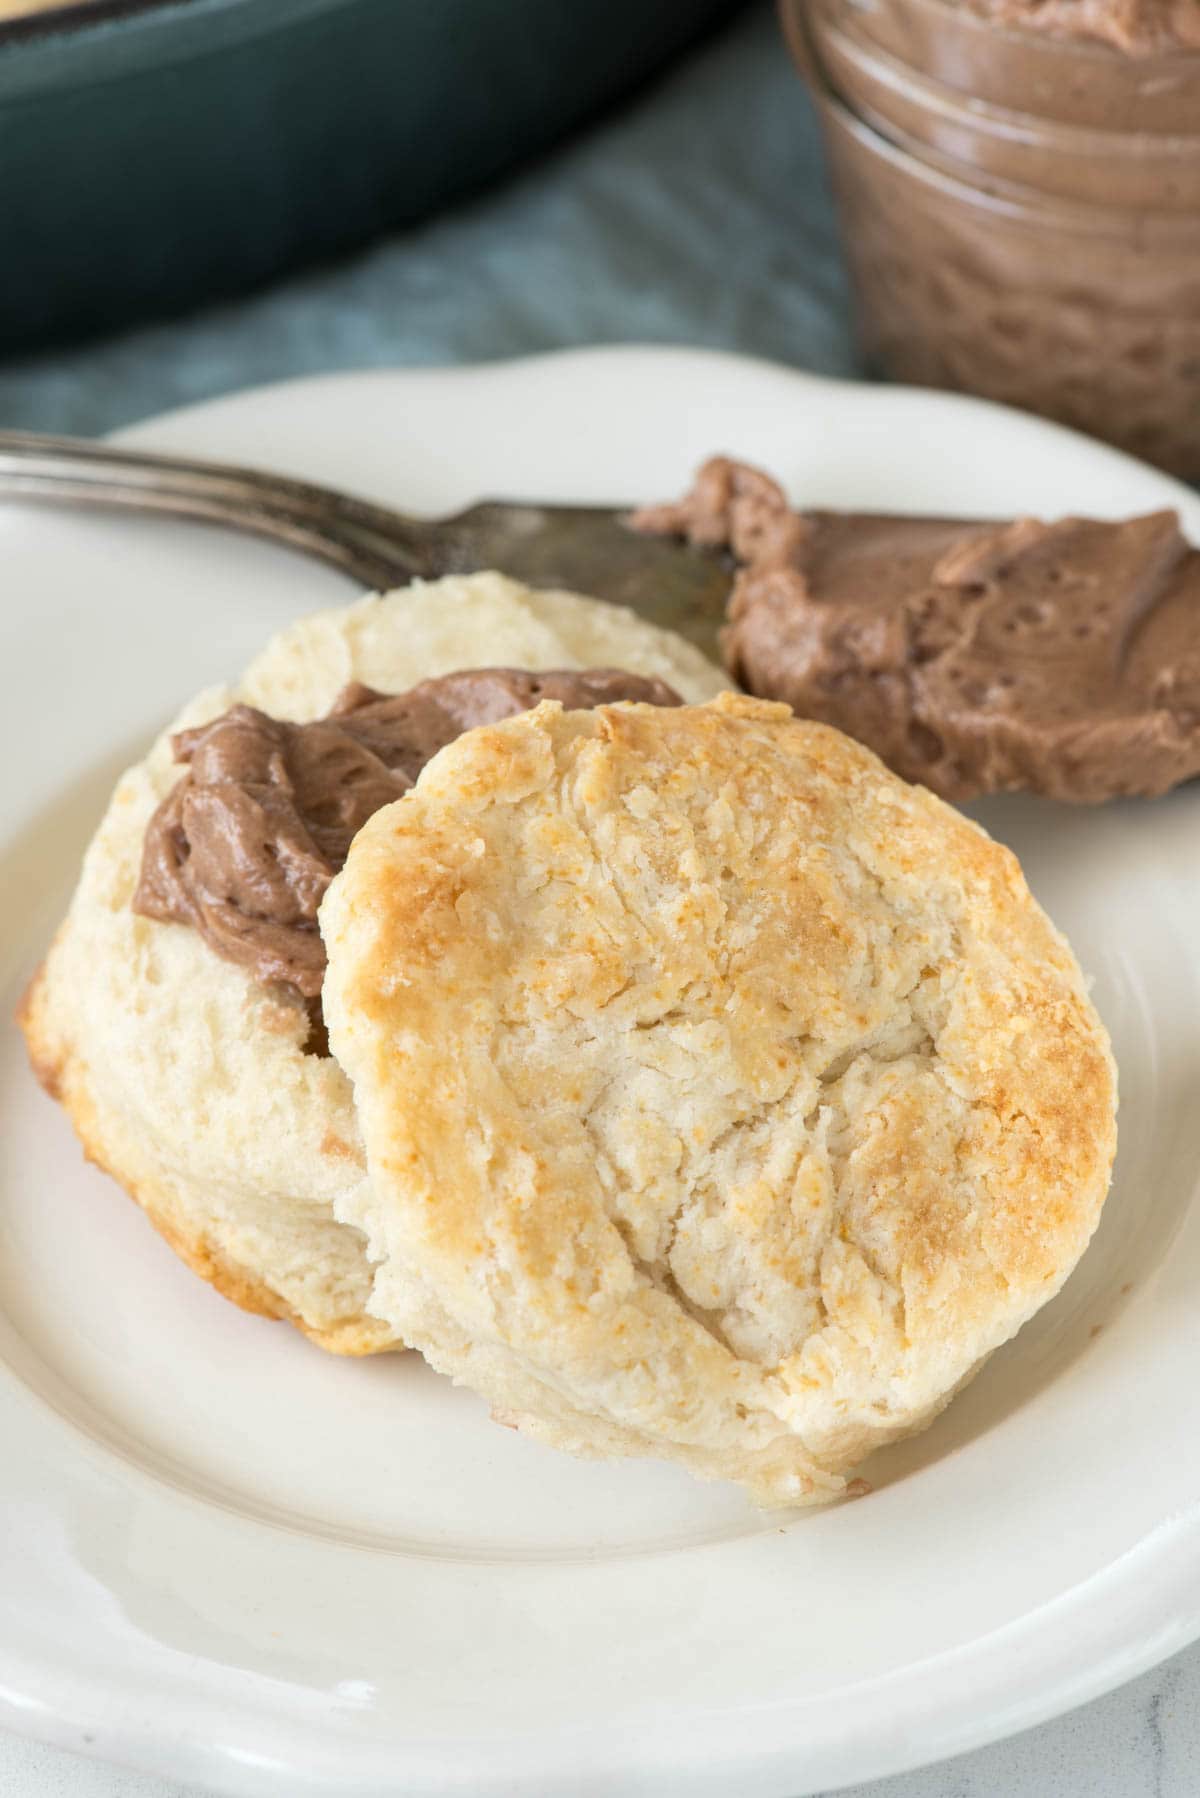 Biscuits with chocolate butter